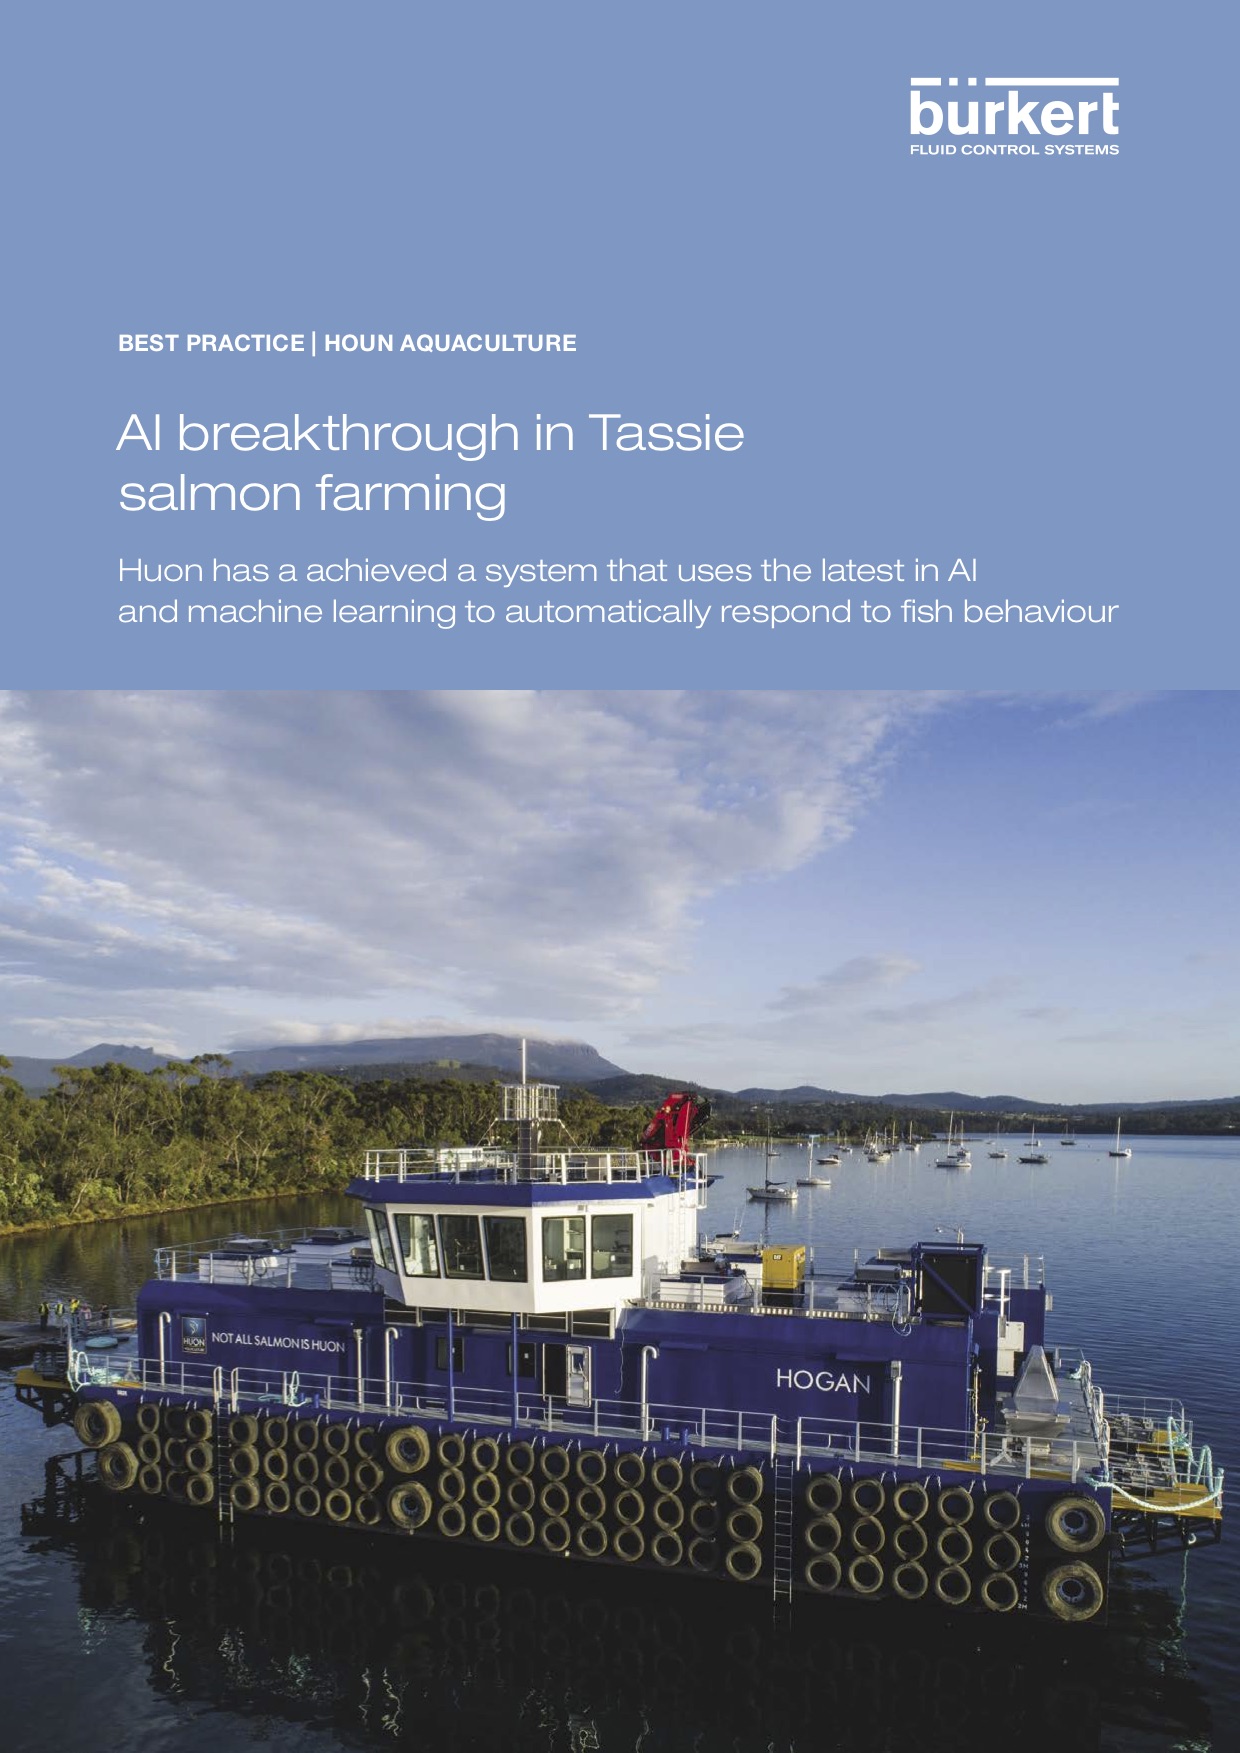 AI breakthrough in Tassie salmon farming: System uses AI and machine learning to automatically respond to fish behaviour.